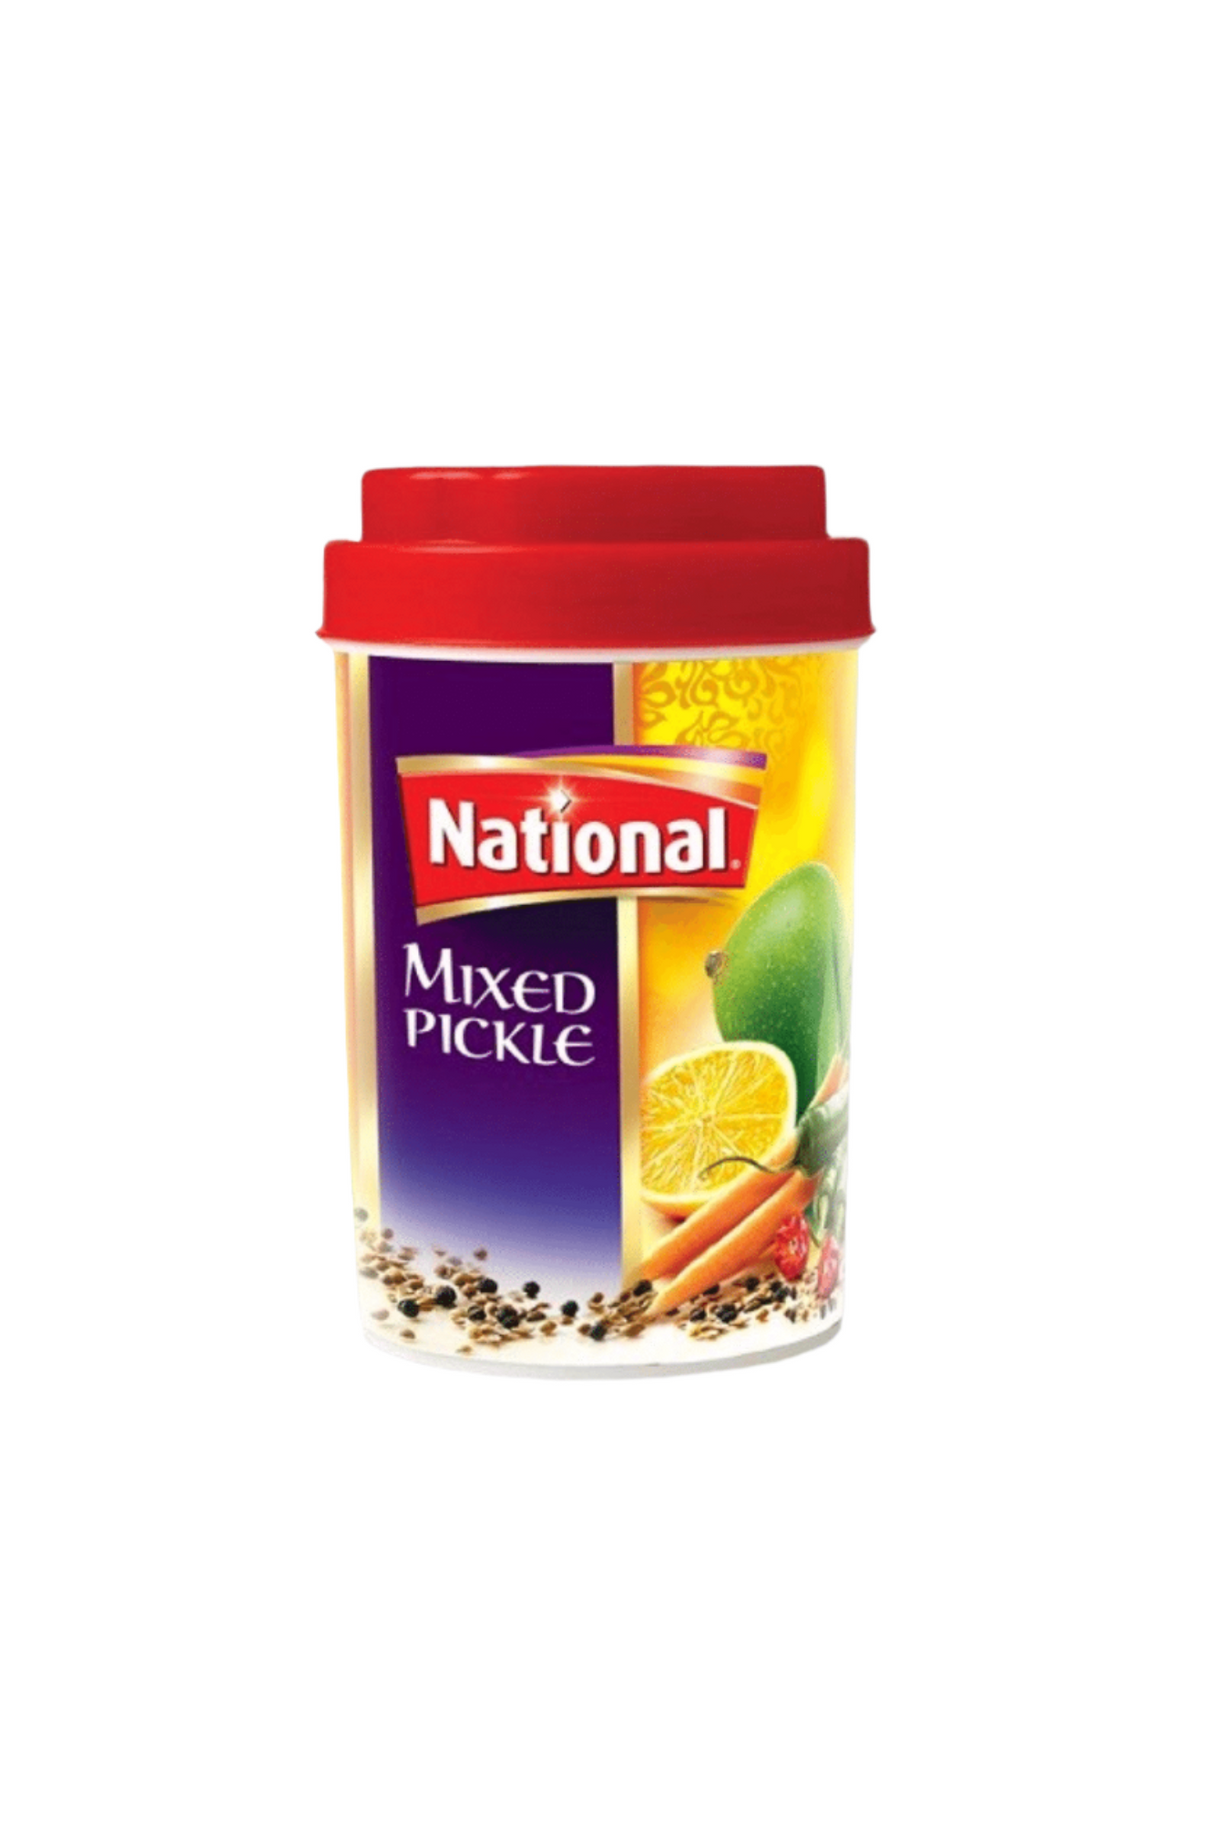 national pickle mixed 900g